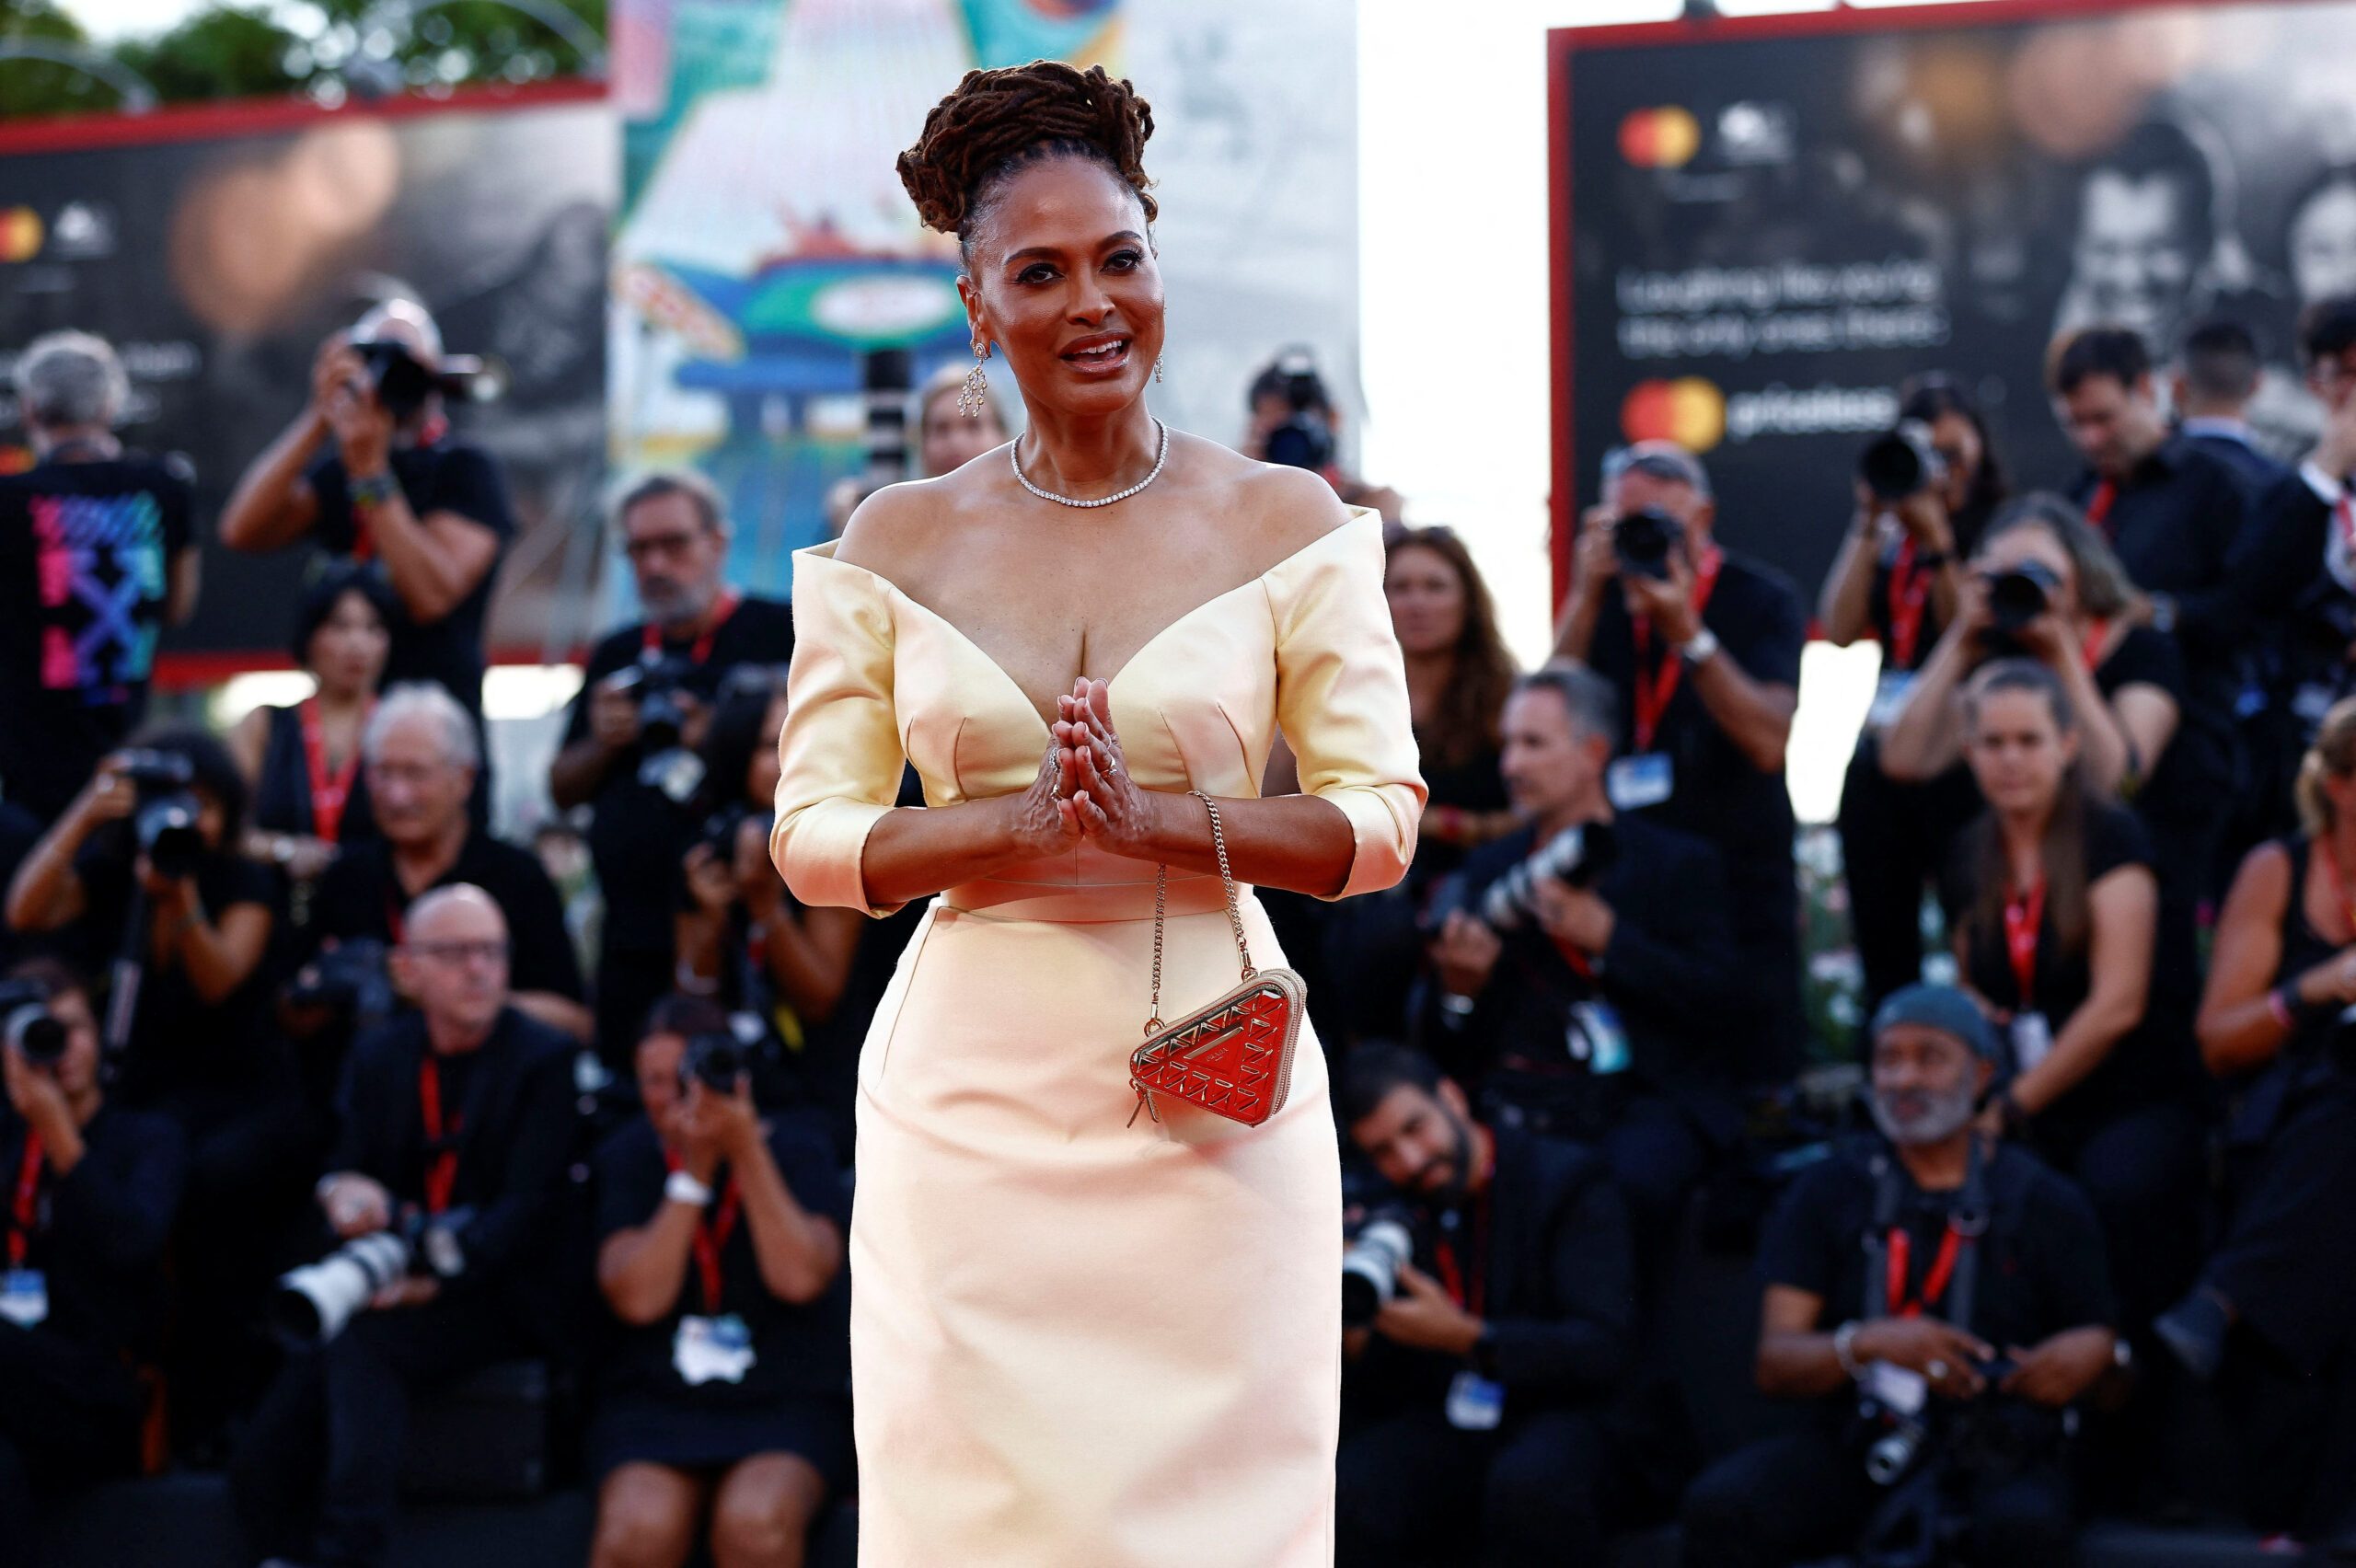 Ava Duvernay Makes History With Venice Premiere Of Origin 